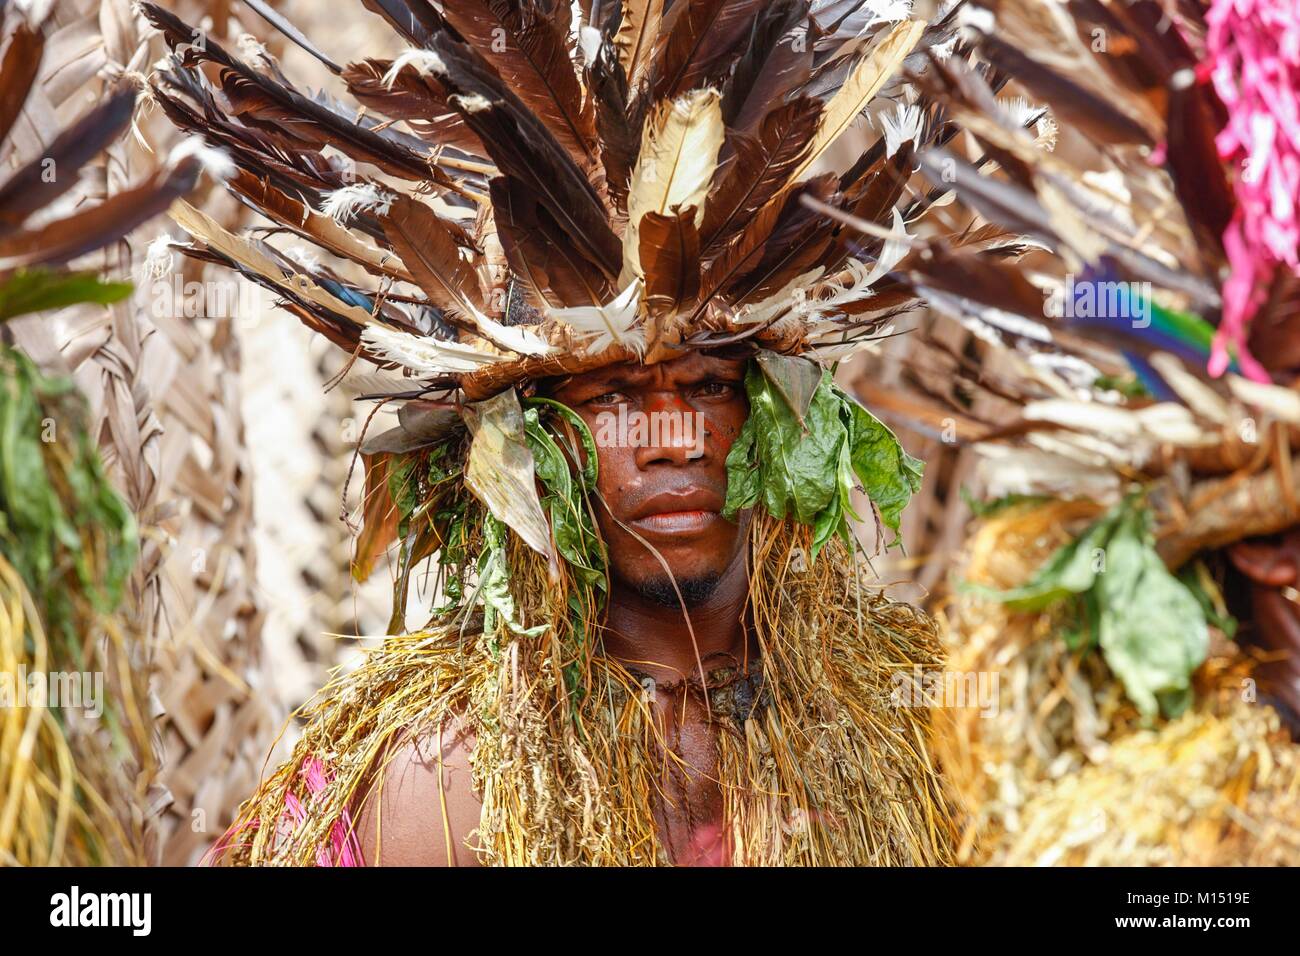 Papua New Guinea, West New Britain, ritual feather headdress of various birds including bird of paradise Stock Photo